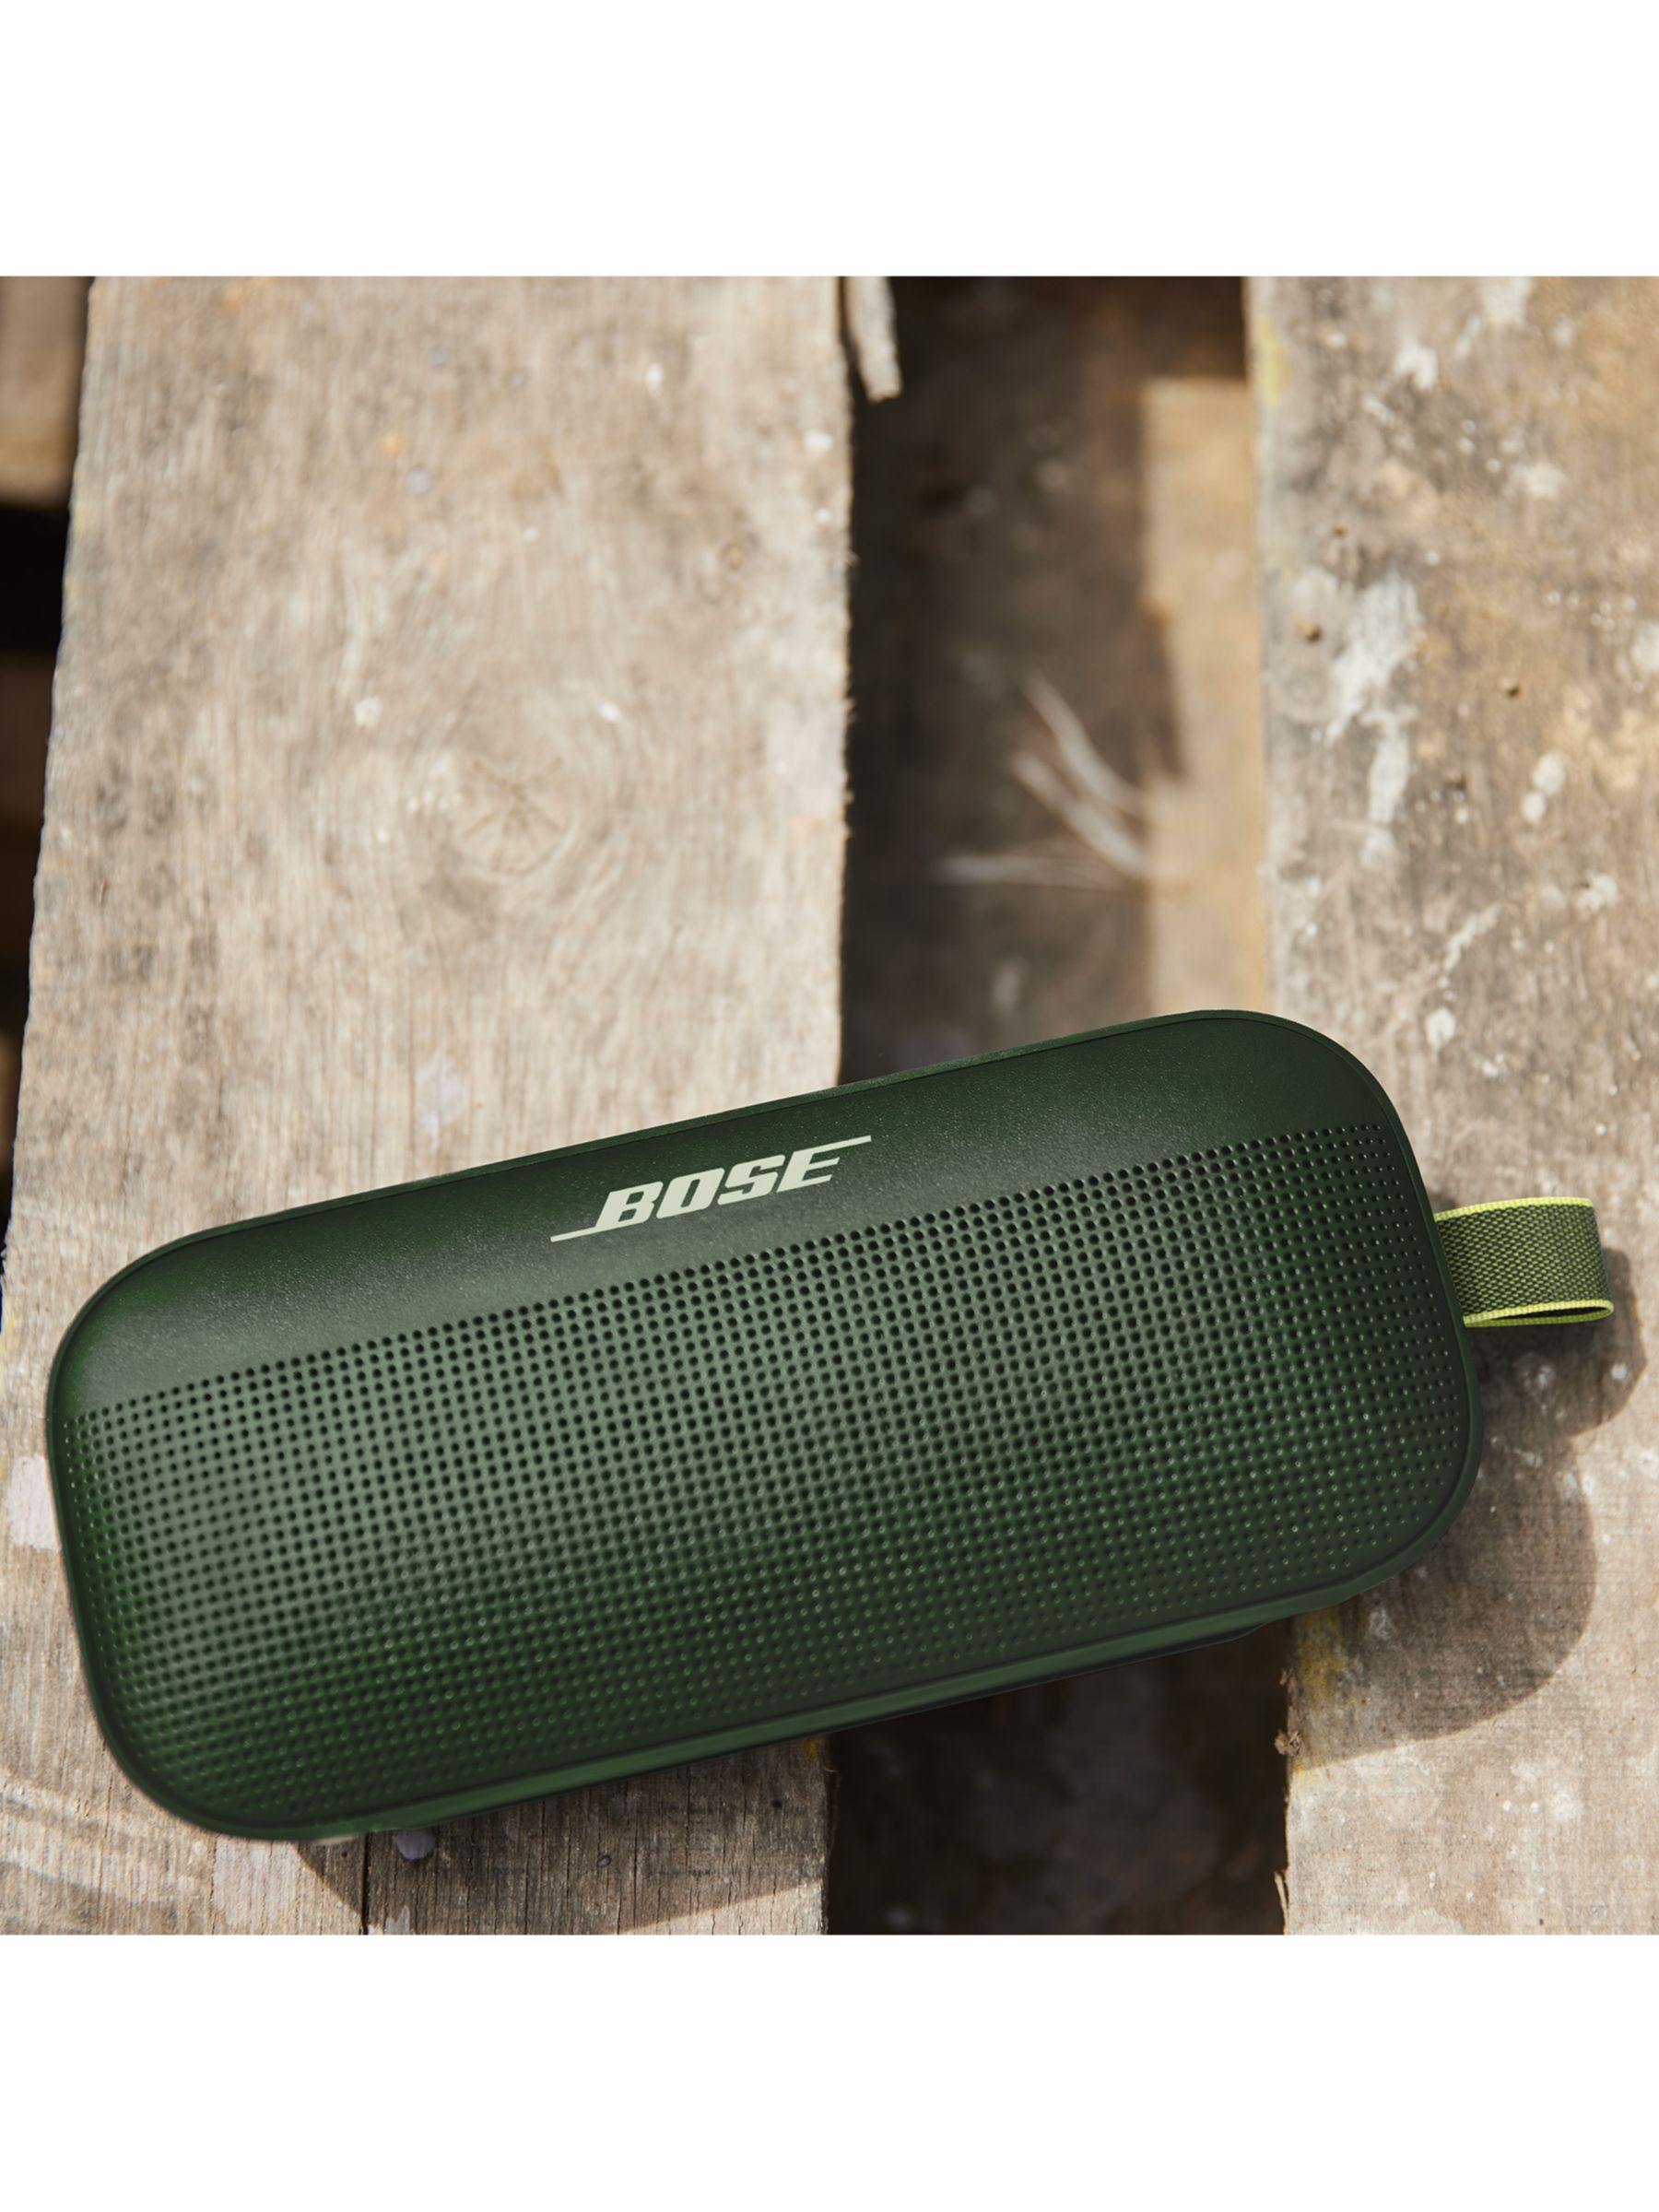 Bose's new SoundLink Flex speaker has a rugged design and 'astonishing'  sound - The Verge